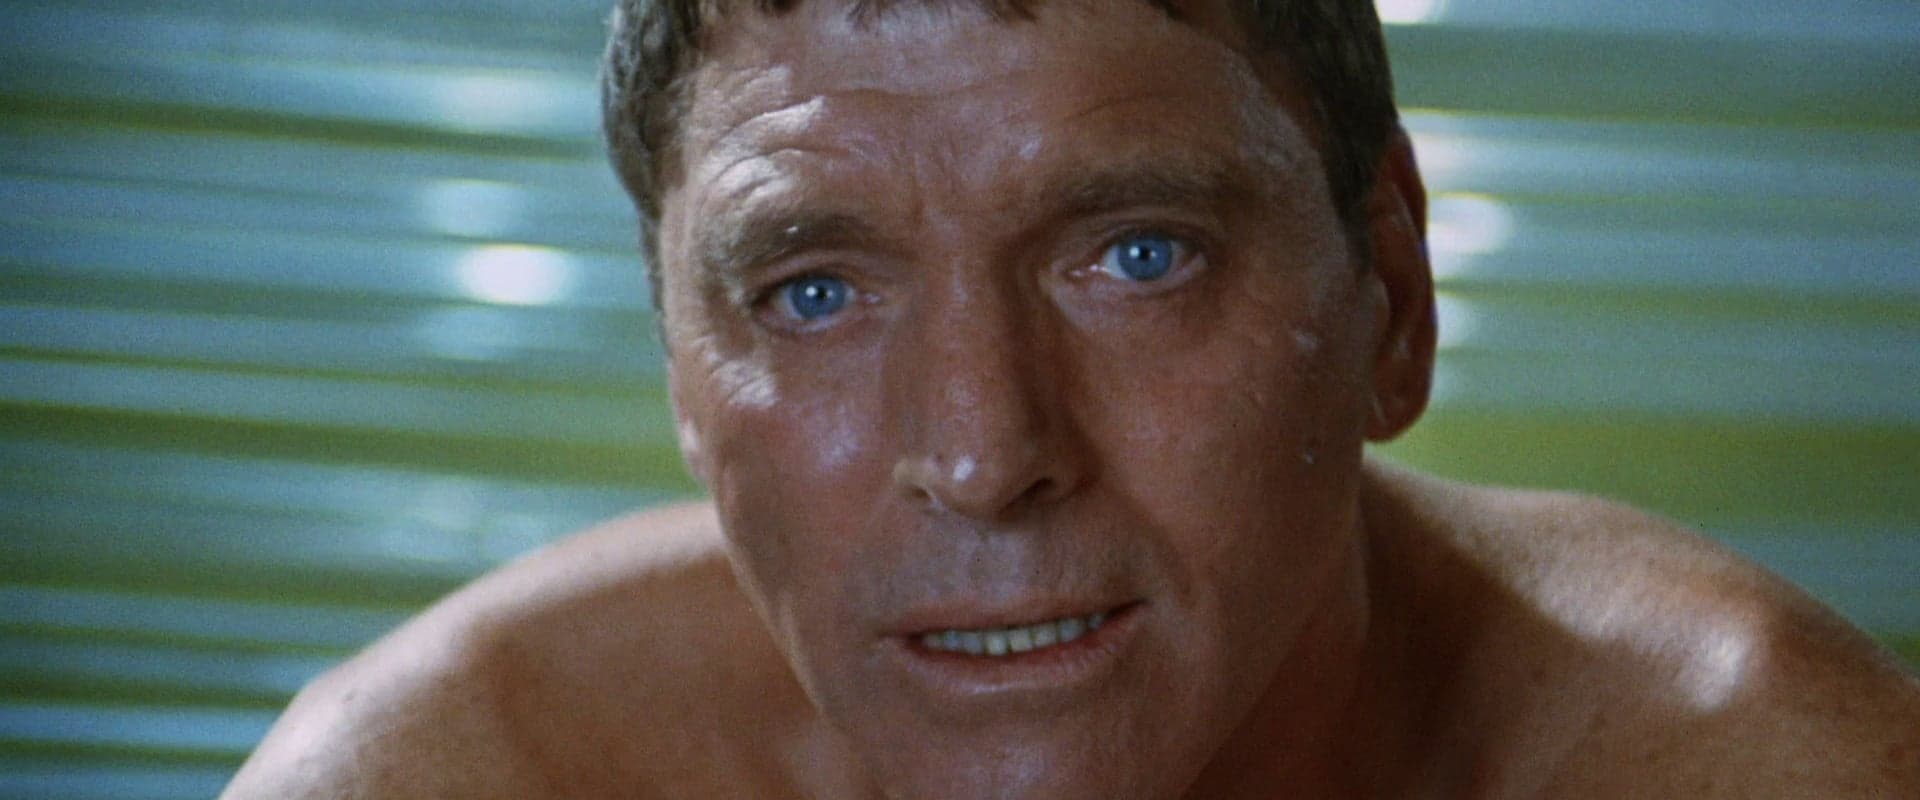 The Swimmer